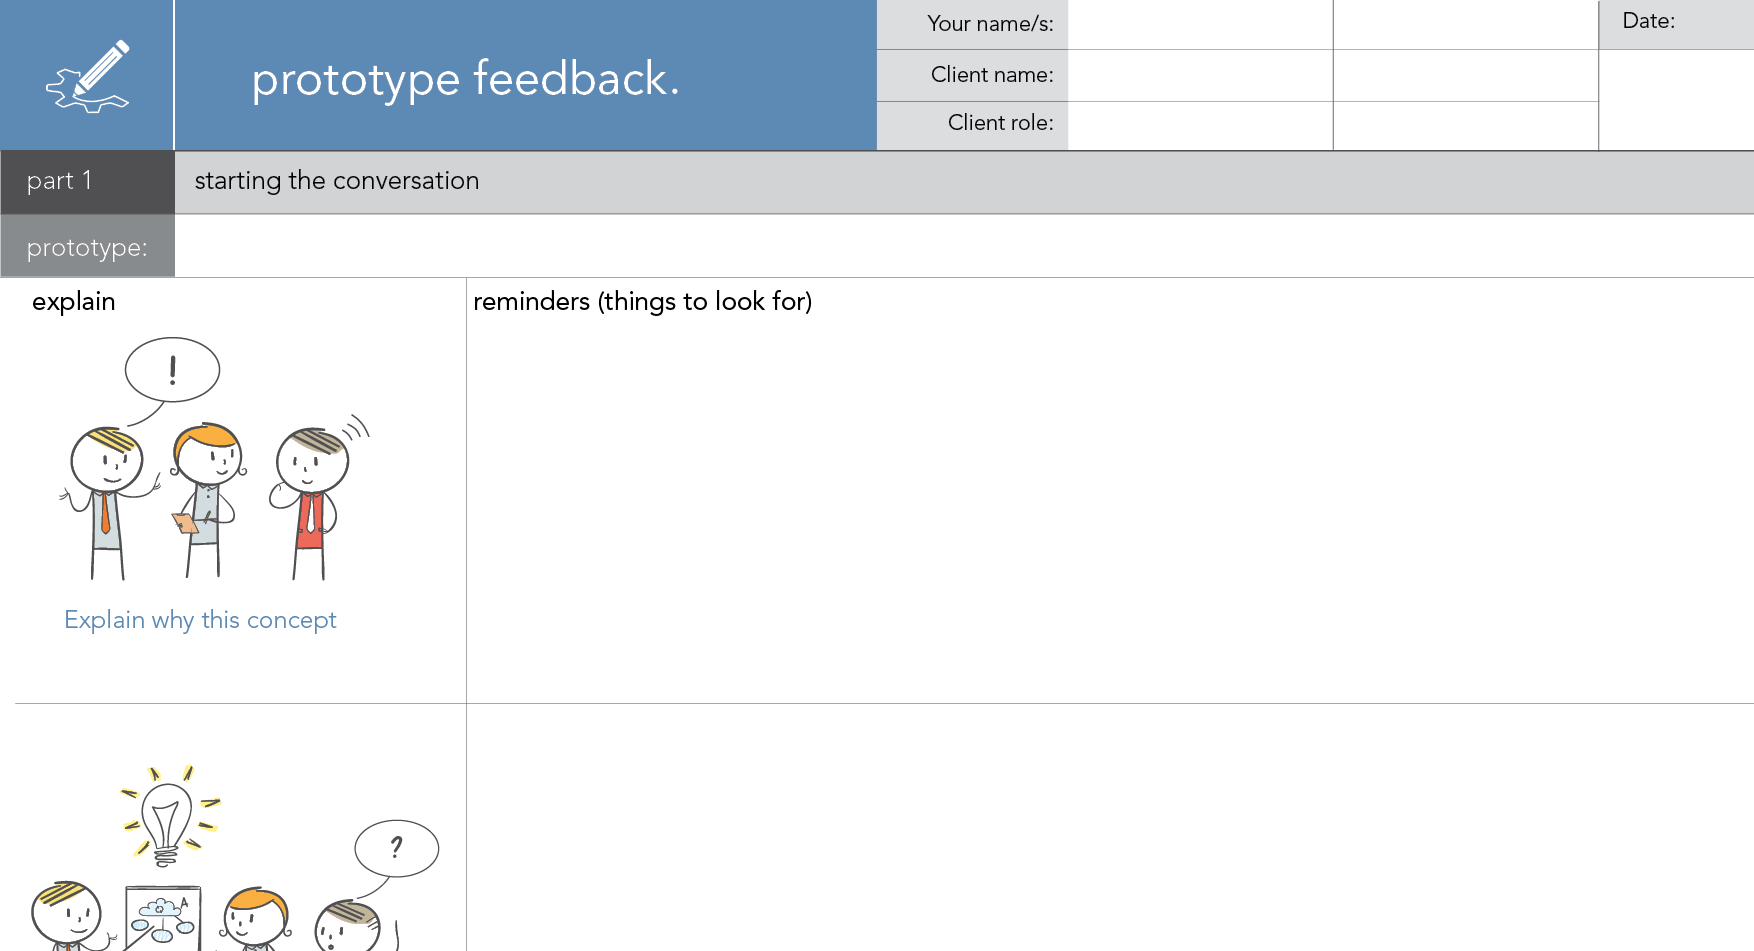 preview of the prototype feedback freebie available for download